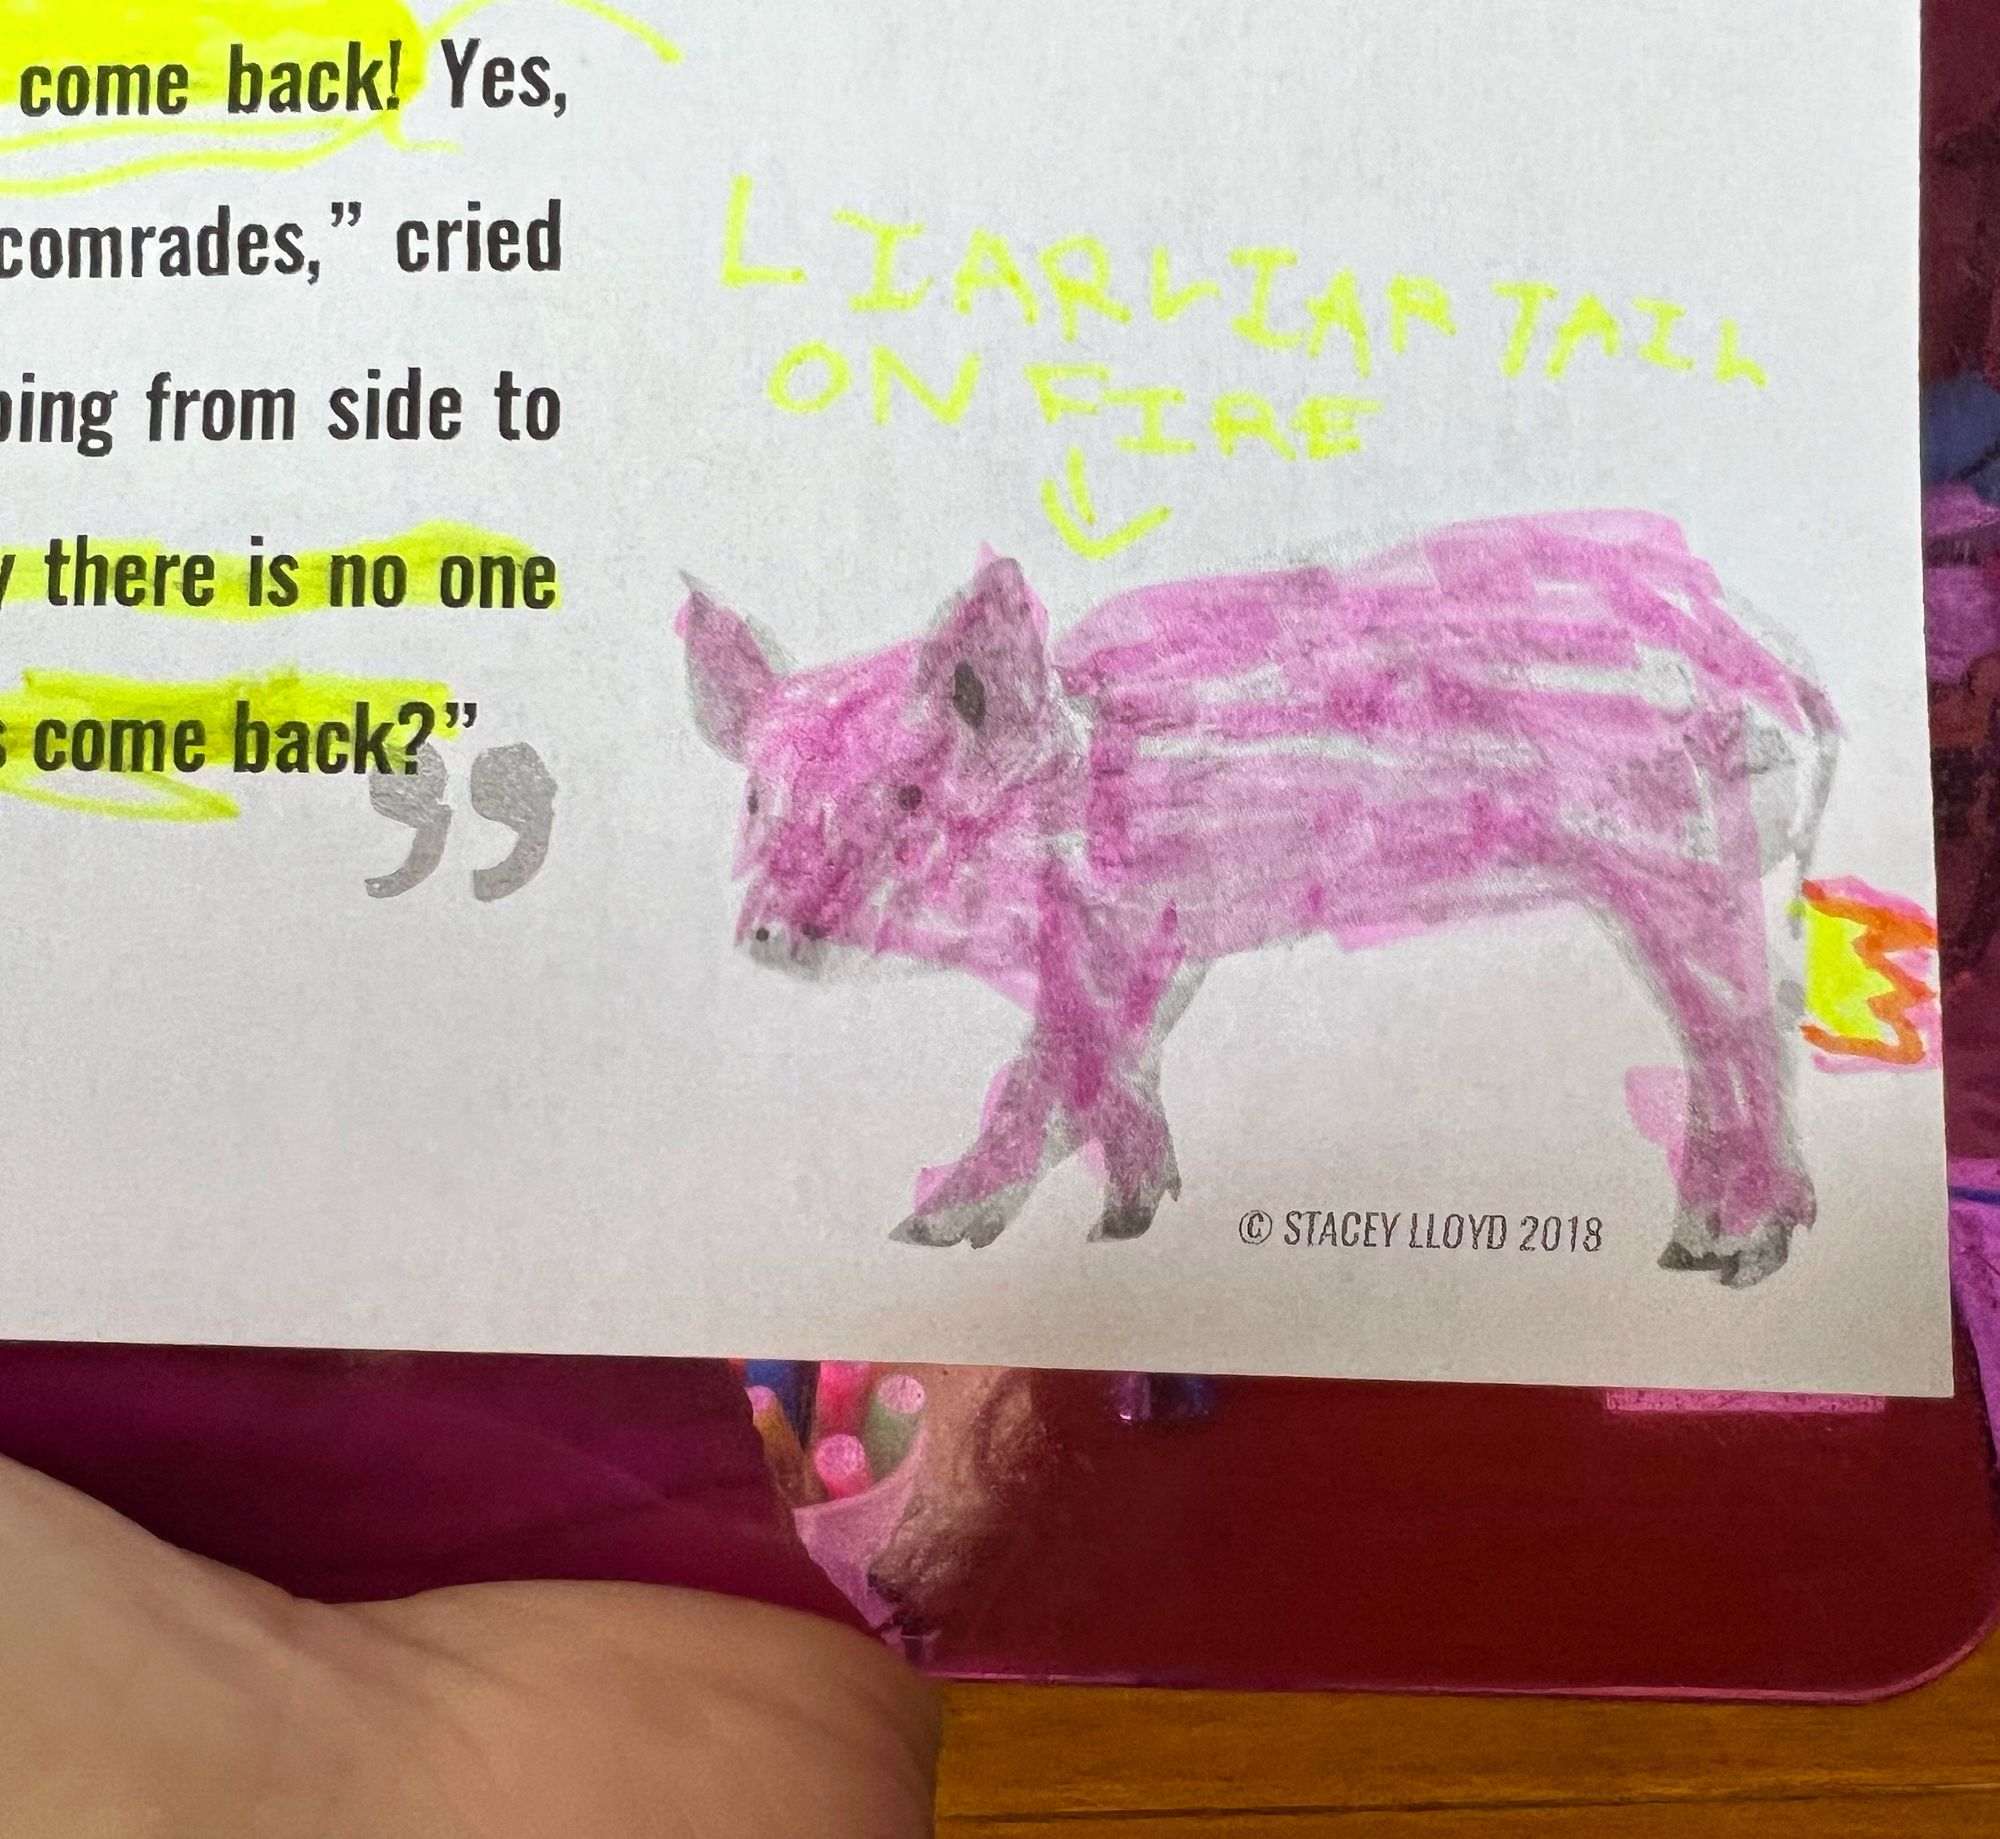 A pig has been colored in pink, with a tail on fire. The words "liar, liar, tail on fire!" are pointing to it.